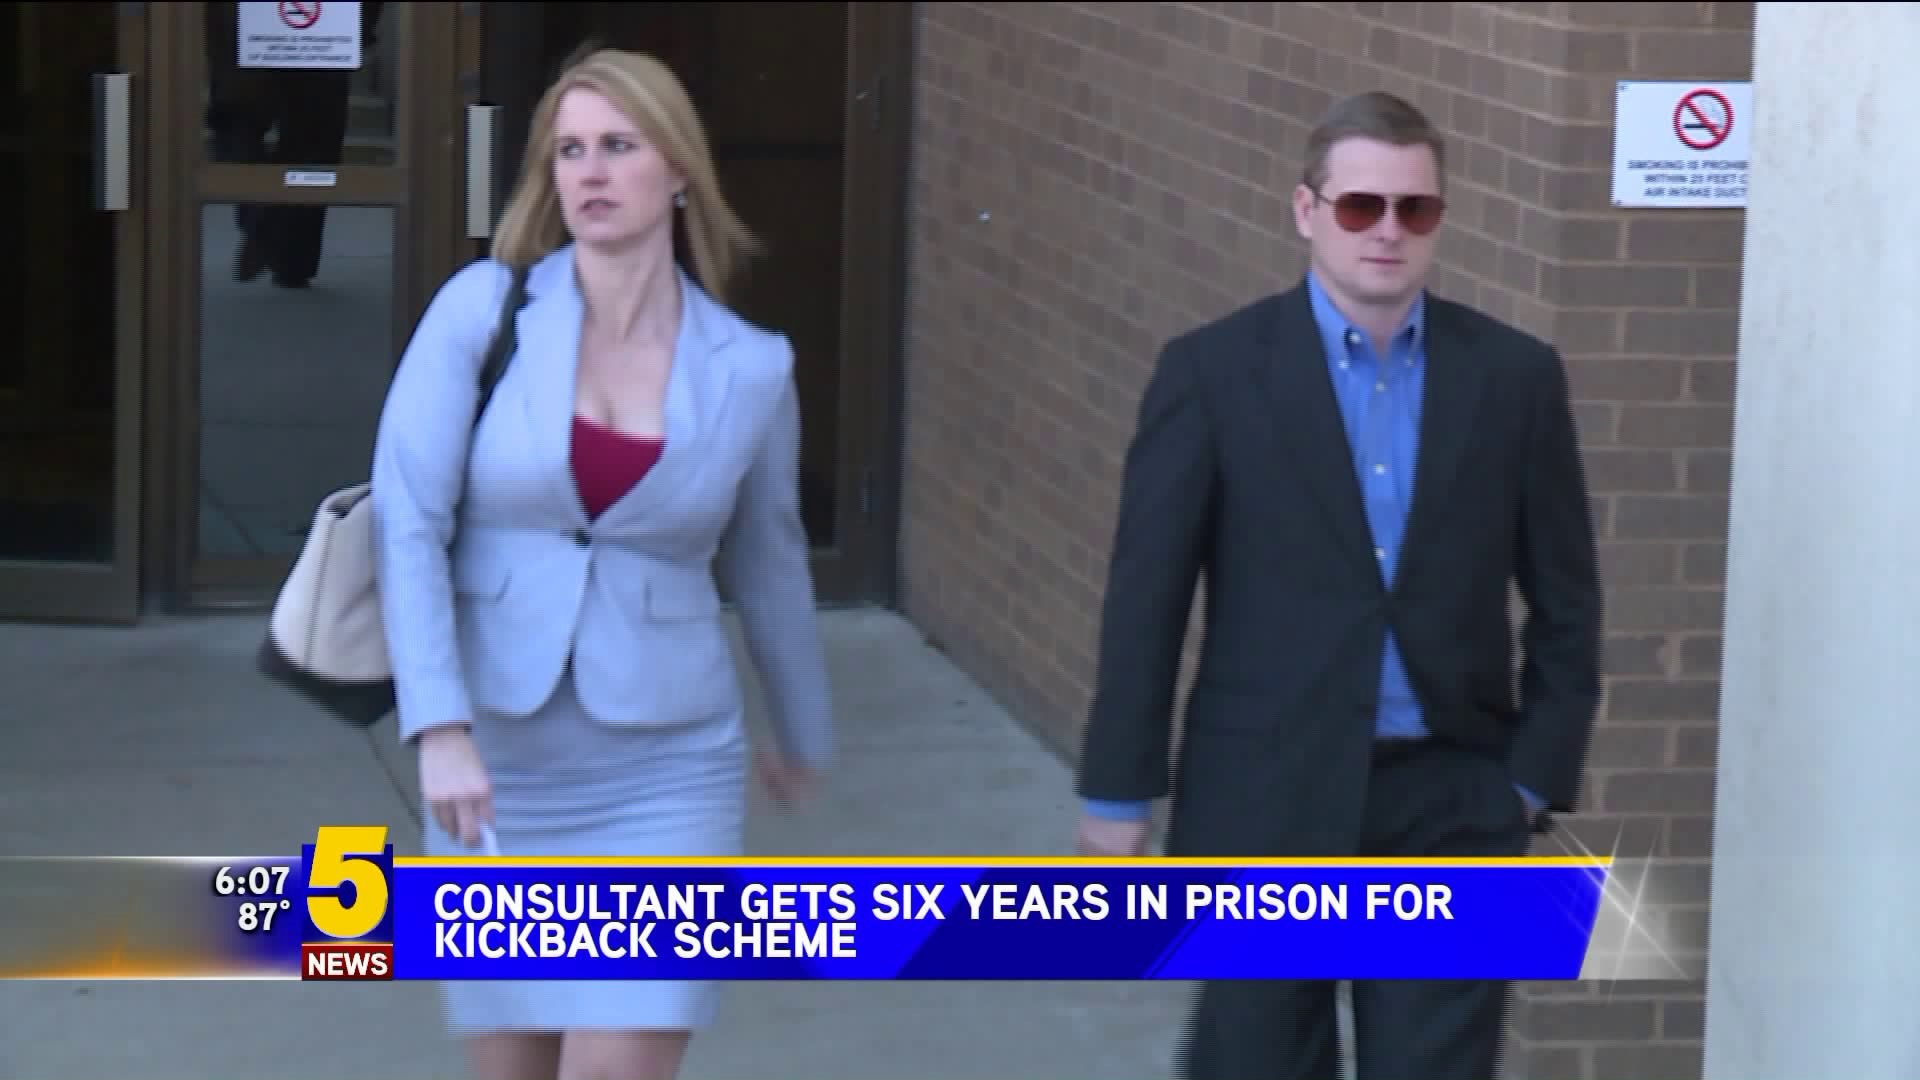 Consultant Gets Six Years In Prison For Kickback Scheme